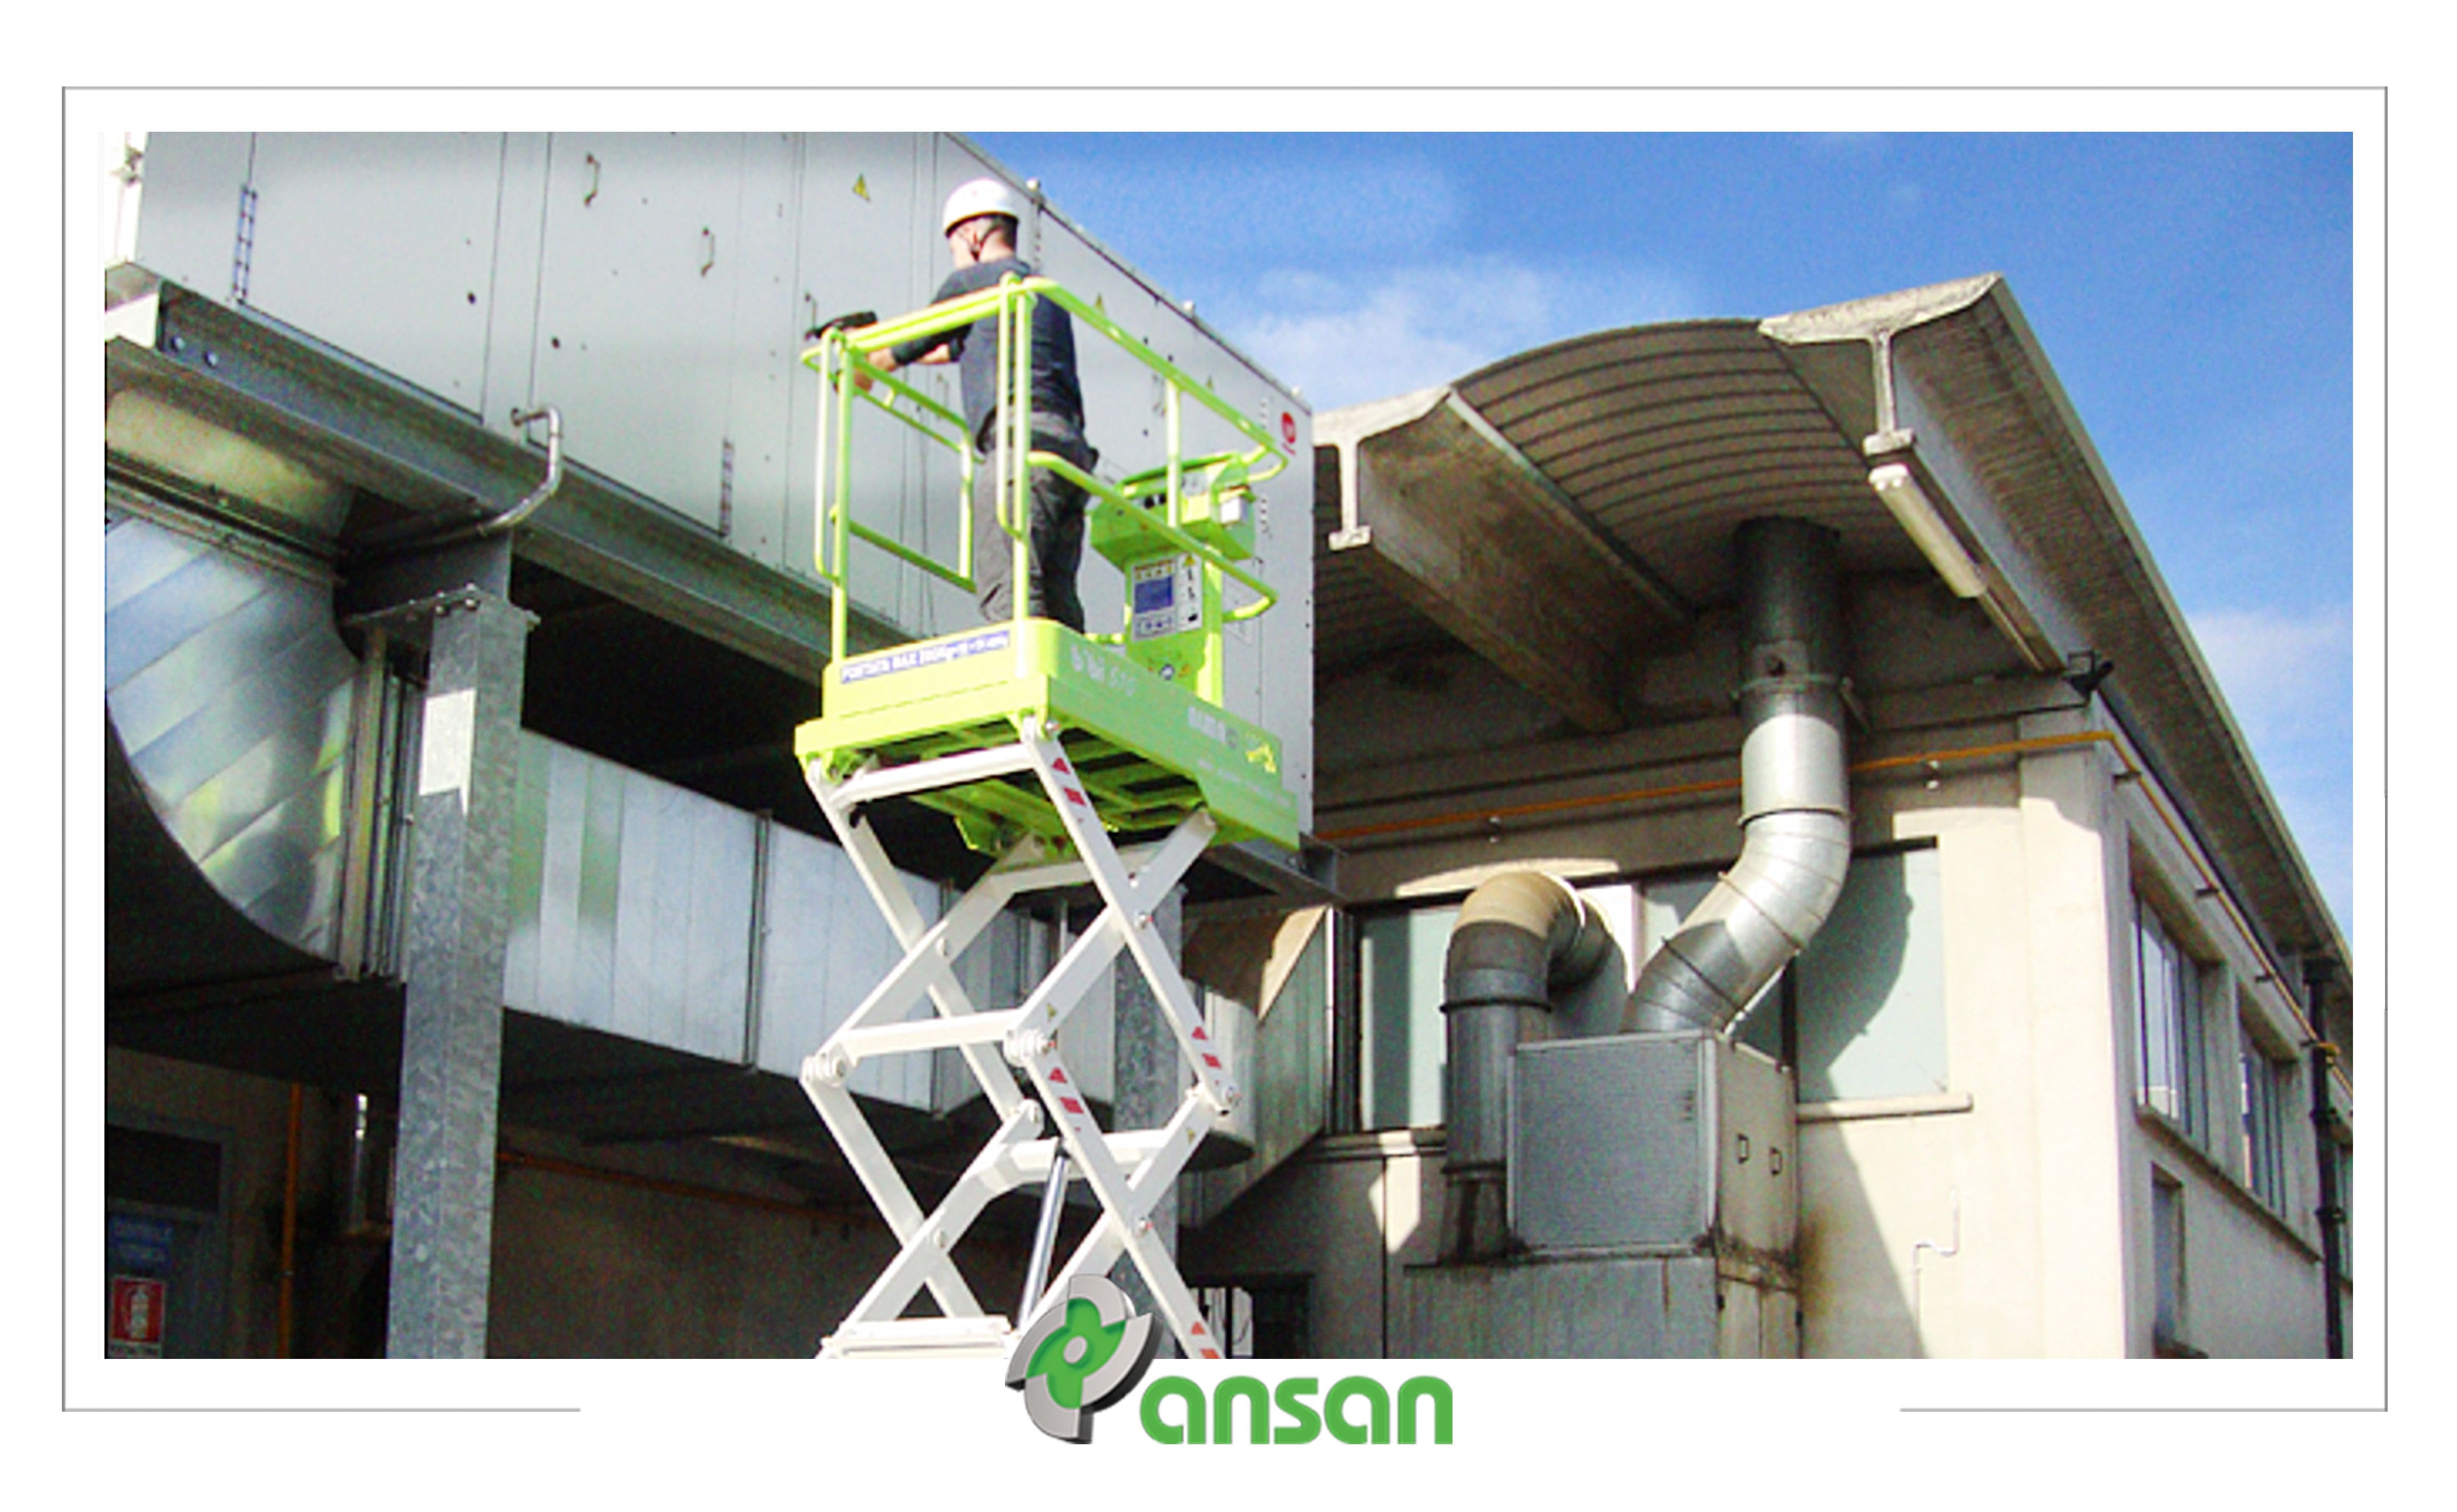 GIANT COOPERATION FROM ANSAN